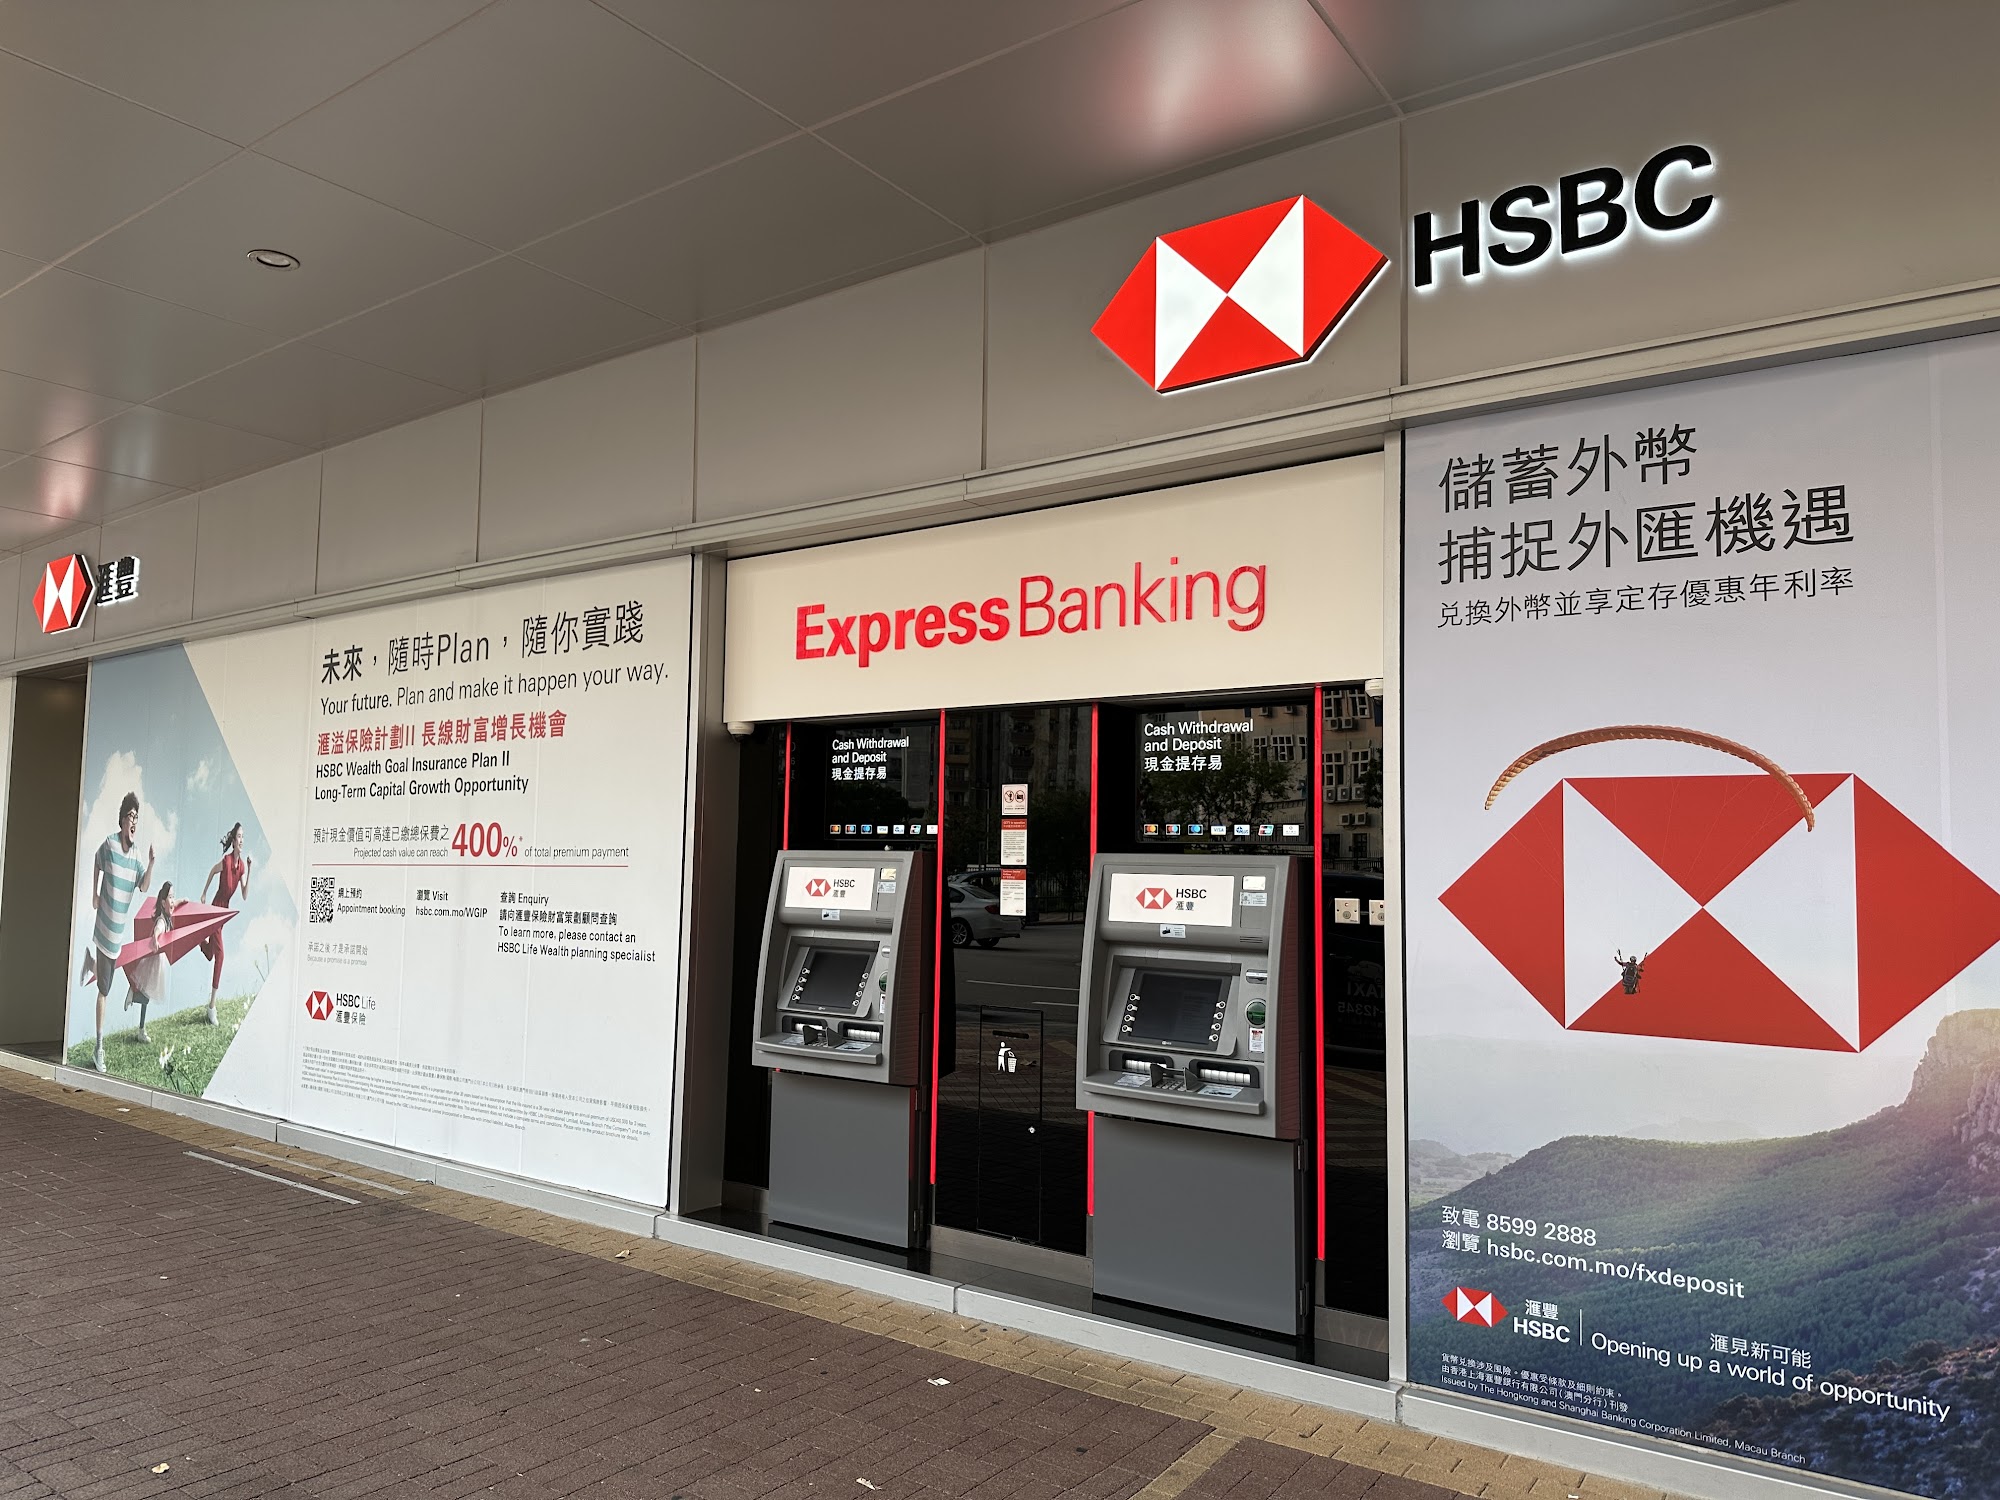 HSBC Opens New Singapore Office With Substantial Growth Plans - Bloomberg